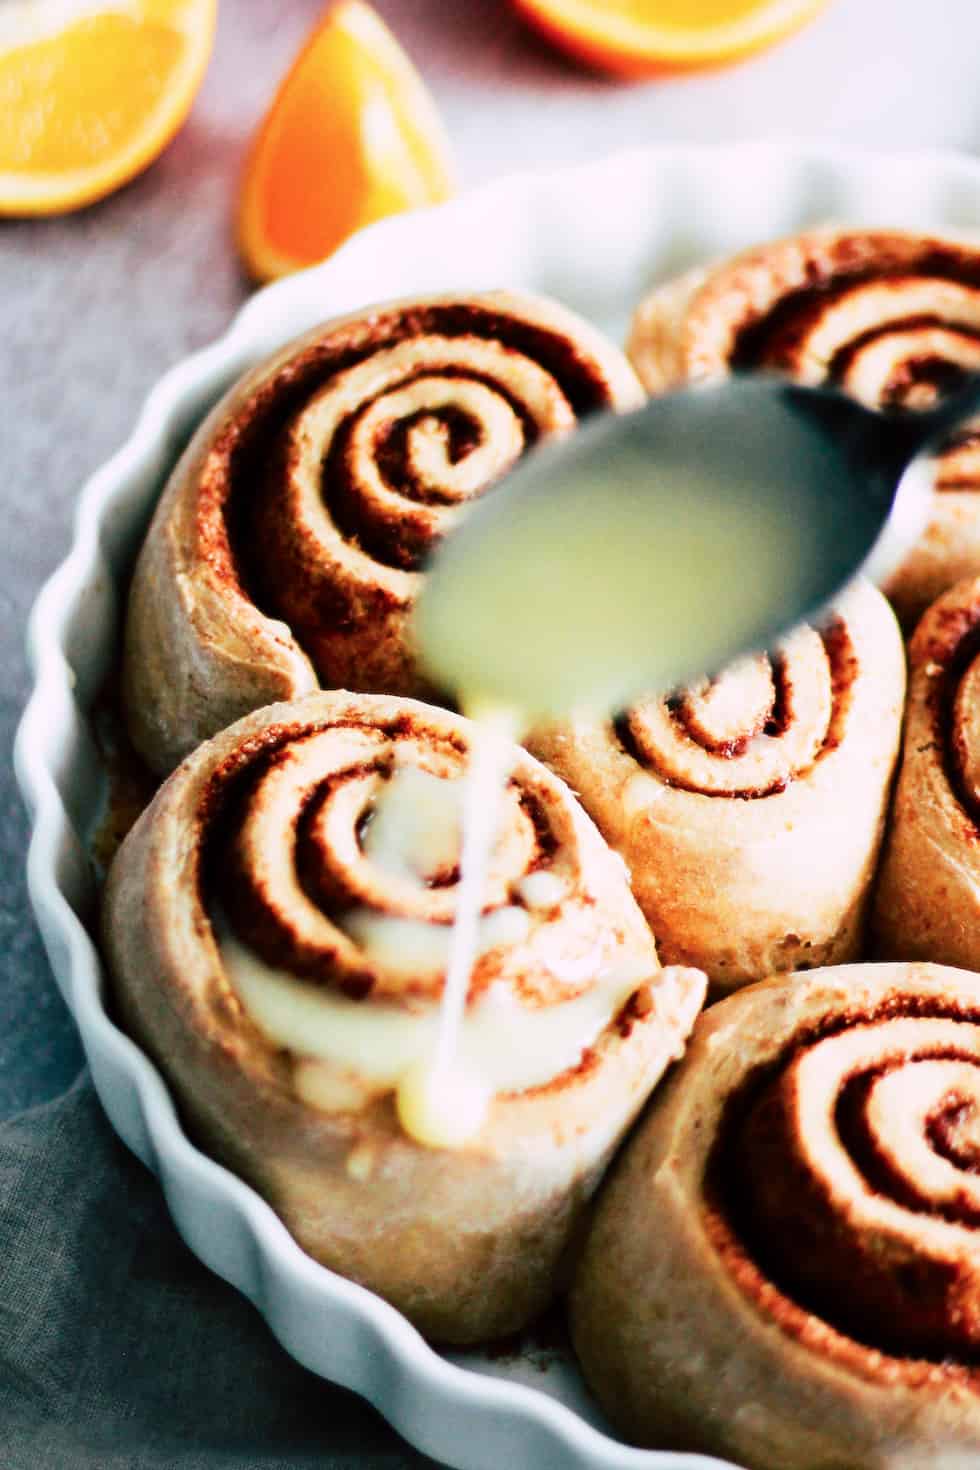 Spoon glazing icing over sweet rolls in a round, white baking dish.